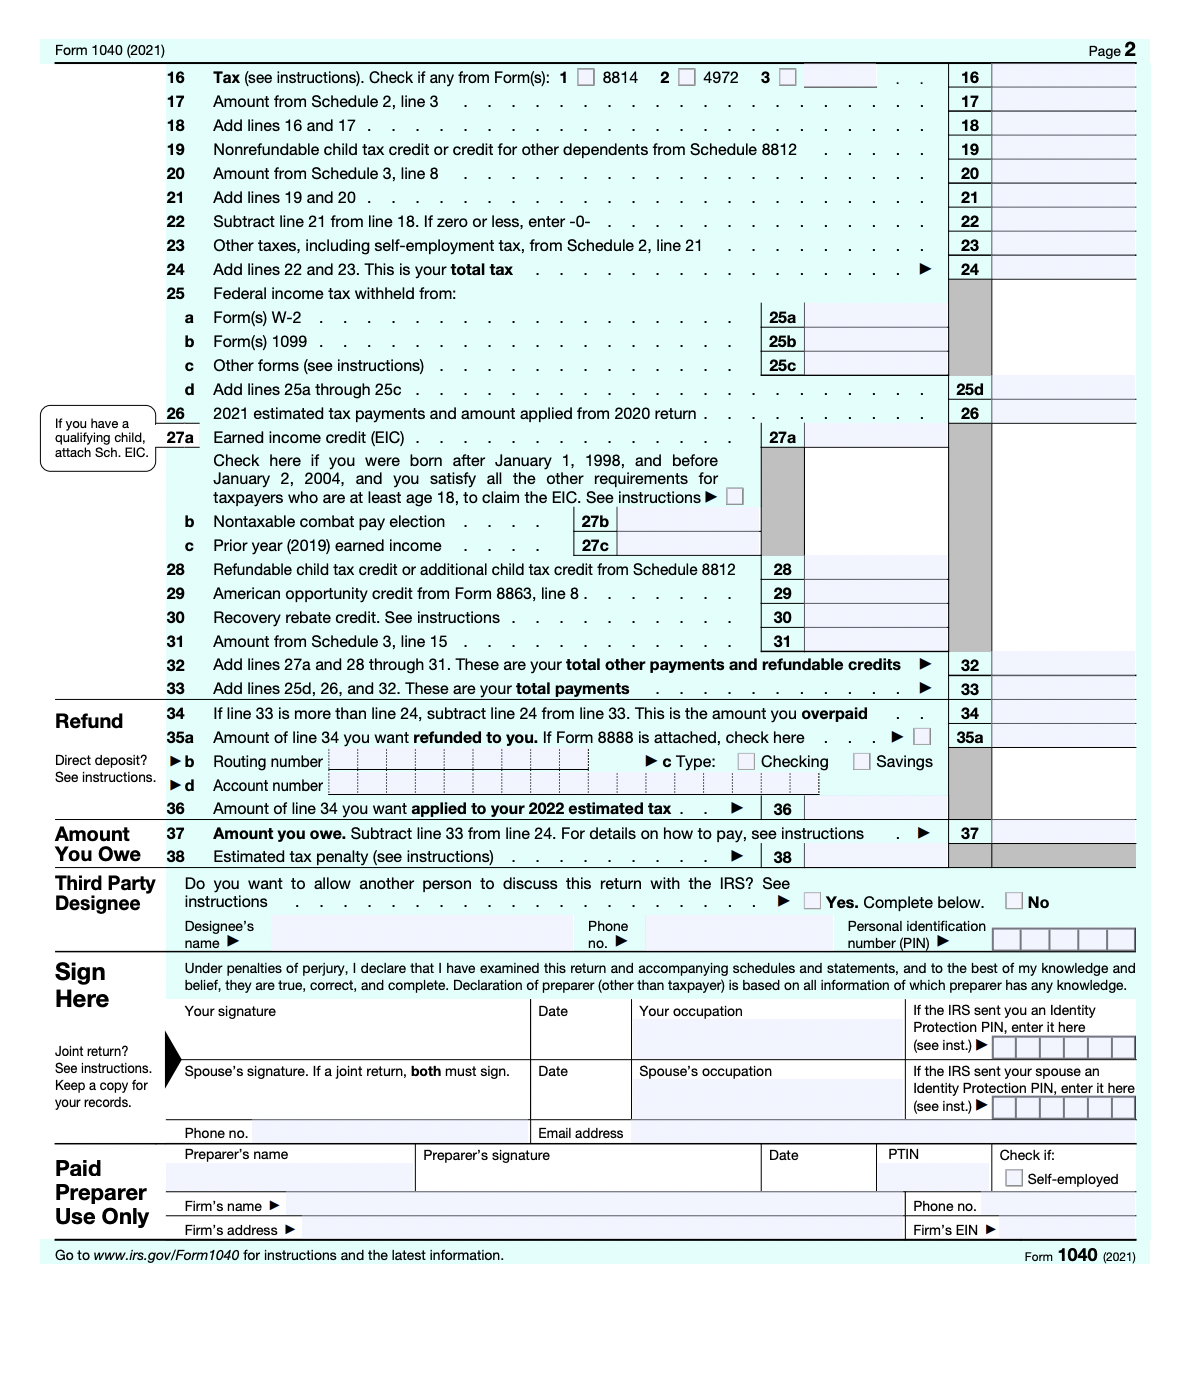 Form 1040 (2021)
16
Tax (see instructions). Check if any from Form(s): 1 8814 2 4972 3
Amount from Schedule 2, line 3
17
18
Add lines 16 and 17
19
Nonrefundable child tax credit
credit for other dependents from Schedule 8812
20
Amount from Schedule 3, line 8
21
Add lines 19 and 20
22
Subtract line 21 from line 18. If zero or less, enter -0-
23
Other taxes, including self-employment tax, from Schedule 2, line 21
24
Add lines 22 and 23. This is your total tax
25
Federal income tax withheld from:
a
Form(s) W-2
25a
b Form(s) 1099
25b
с
Other forms (see instructions)
25c
d
Add lines 25a through 25c
26
2021 estimated tax payments and amount applied from 2020 return
Earned income credit (EIC)
27a
27a
Check here if you were born after January 1, 1998, and before
January 2, 2004, and you satisfy all the other requirements for
taxpayers who are at least age 18, to claim the EIC. See instructions ►
Nontaxable combat pay election
27b
b
с
Prior year (2019) earned income
27c
28
28
Refundable child tax credit or additional child tax credit from Schedule 8812
American opportunity credit from Form 8863, line 8.
29
29
30
Recovery rebate credit. See instructions
30
31
Amount from Schedule 3, line 15
31
32
32
Add lines 27a and 28 through 31. These are your total other payments and refundable credits
Add lines 25d, 26, and 32. These are your total payments
33
33
34
Refund
34
35a
Direct deposit? ▶b
See instructions.
► d
If line 33 is more than line 24, subtract line 24 from line 33. This is the amount you overpaid
Amount of line 34 you want refunded to you. If Form 8888 is attached, check here
Routing number
► c Type:
35a
Checking
Account number
36
36
.
Amount of line 34 you want applied to your 2022 estimated tax.
Amount you owe. Subtract line 33 from line 24. For details on how to pay, see instructions
Estimated tax penalty (see instructions)
38
Amount 37
You Owe 38
37
▶
Third Party
Designee
Do you want to allow another person to discuss this return with the IRS? See
instructions
Yes. Complete below. No
Designee's
name ▶
Phone
no. ►
Personal identification
number (PIN) ►
Sign
Under penalties of perjury, I declare that I have examined this return and accompanying schedules and statements, and to the best of my knowledge and
belief, they are true, correct, and complete. Declaration of preparer (other than taxpayer) is based on all information of which preparer has any knowledge.
Your signature
Date
Your occupation
Here
If the IRS sent you an Identity
Protection PIN, enter it here
(see inst.) ►
Joint return?
Spouse's signature. If a joint return, both must sign. Date
Spouse's occupation
See instructions.
Keep a copy for
your records.
If the IRS sent your spouse an
Identity Protection PIN, enter it here
(see inst.) ►
Phone no.
Preparer's name
Preparer's signature
Check if:
Paid
Preparer
Self-employed
Firm's name ▶
Use Only
Firm's address ►
Go to www.irs.gov/Form 1040 for instructions and the latest information.
Form 1040 (2021)
If you have a
qualifying child,
attach Sch. EIC.
Email address
Date
Savings
PTIN
16
17
18
19
20
21
22
23
24
25d
26
بابايا | |
Phone no.
Firm's EIN ►
Page 2